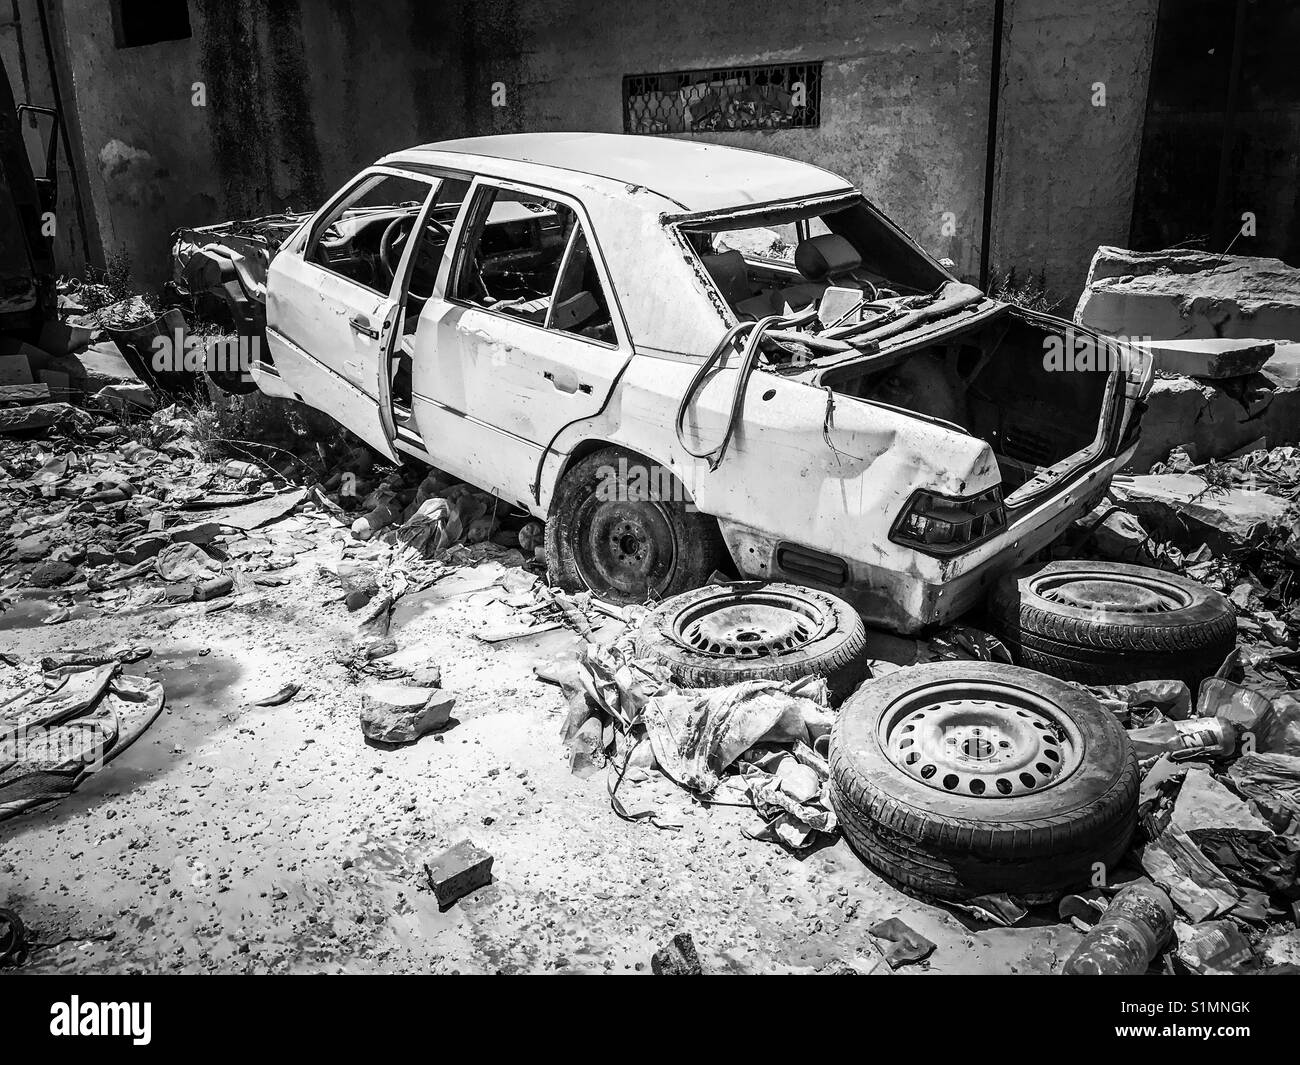 A vehicle damaged in Aida Camp in Bethlehem, Palestine, due to Israeli artillery fire during the second intifada of 2002. Stock Photo